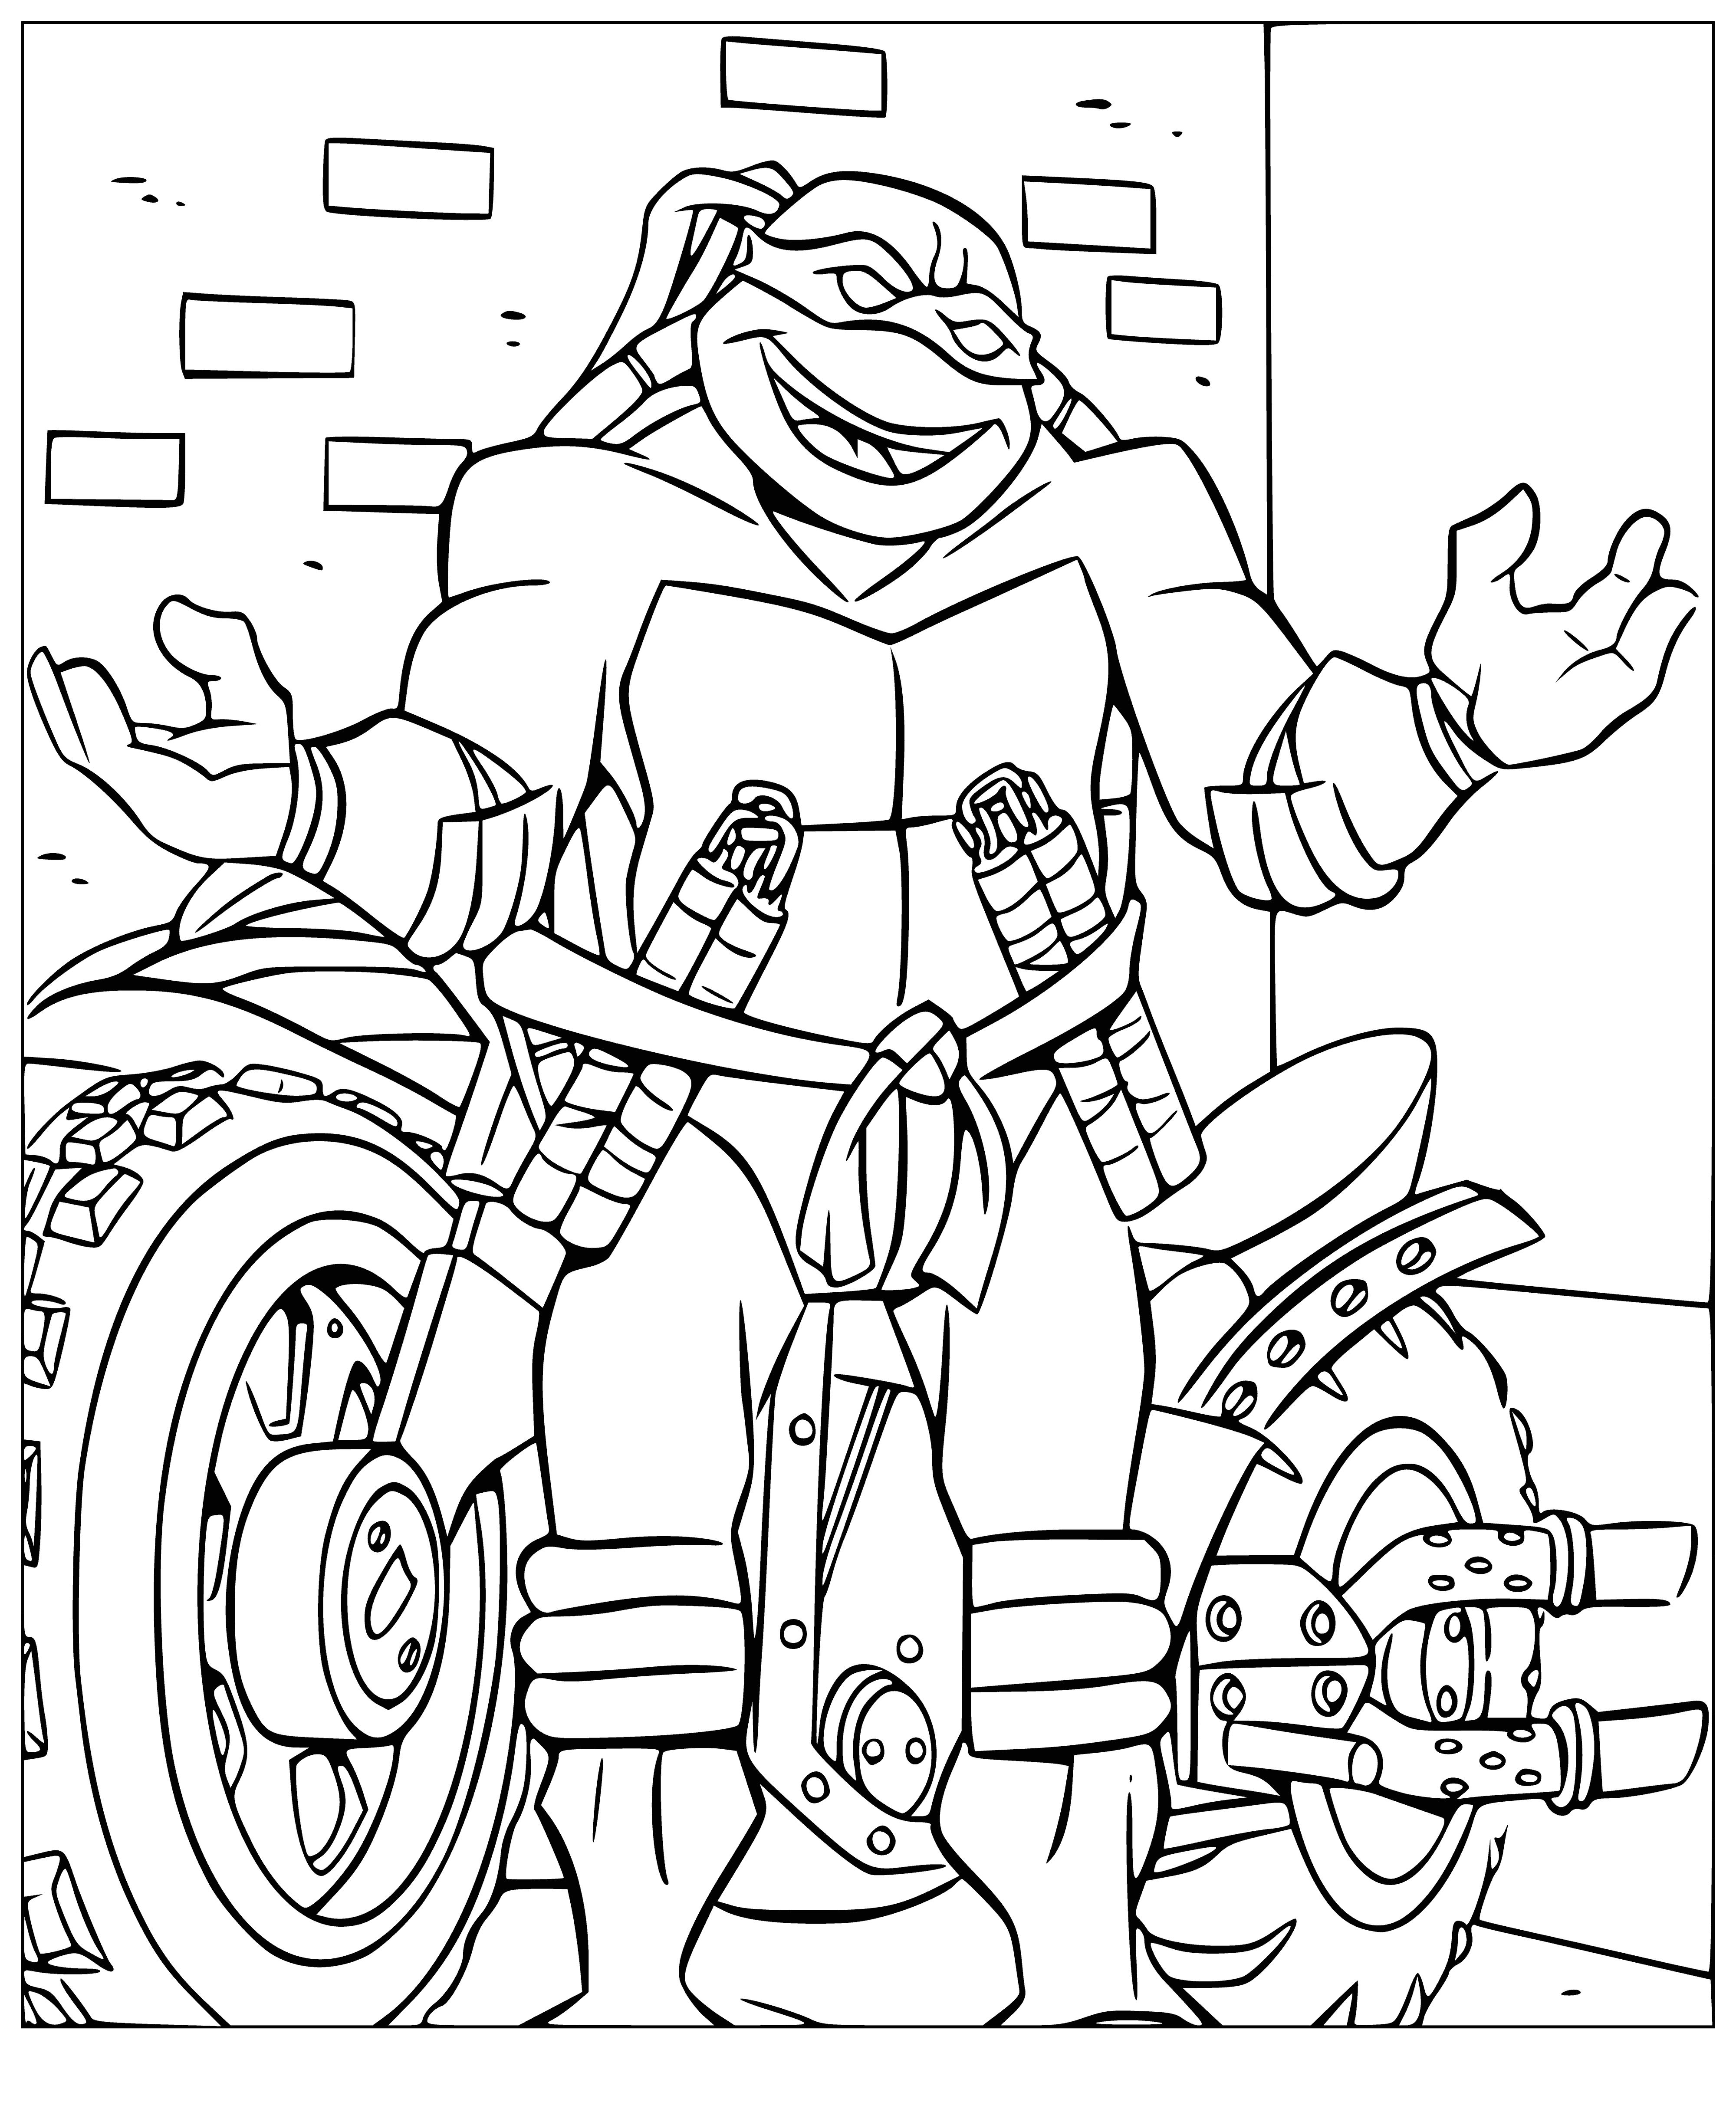 Michelangelo and the motorcycle coloring page